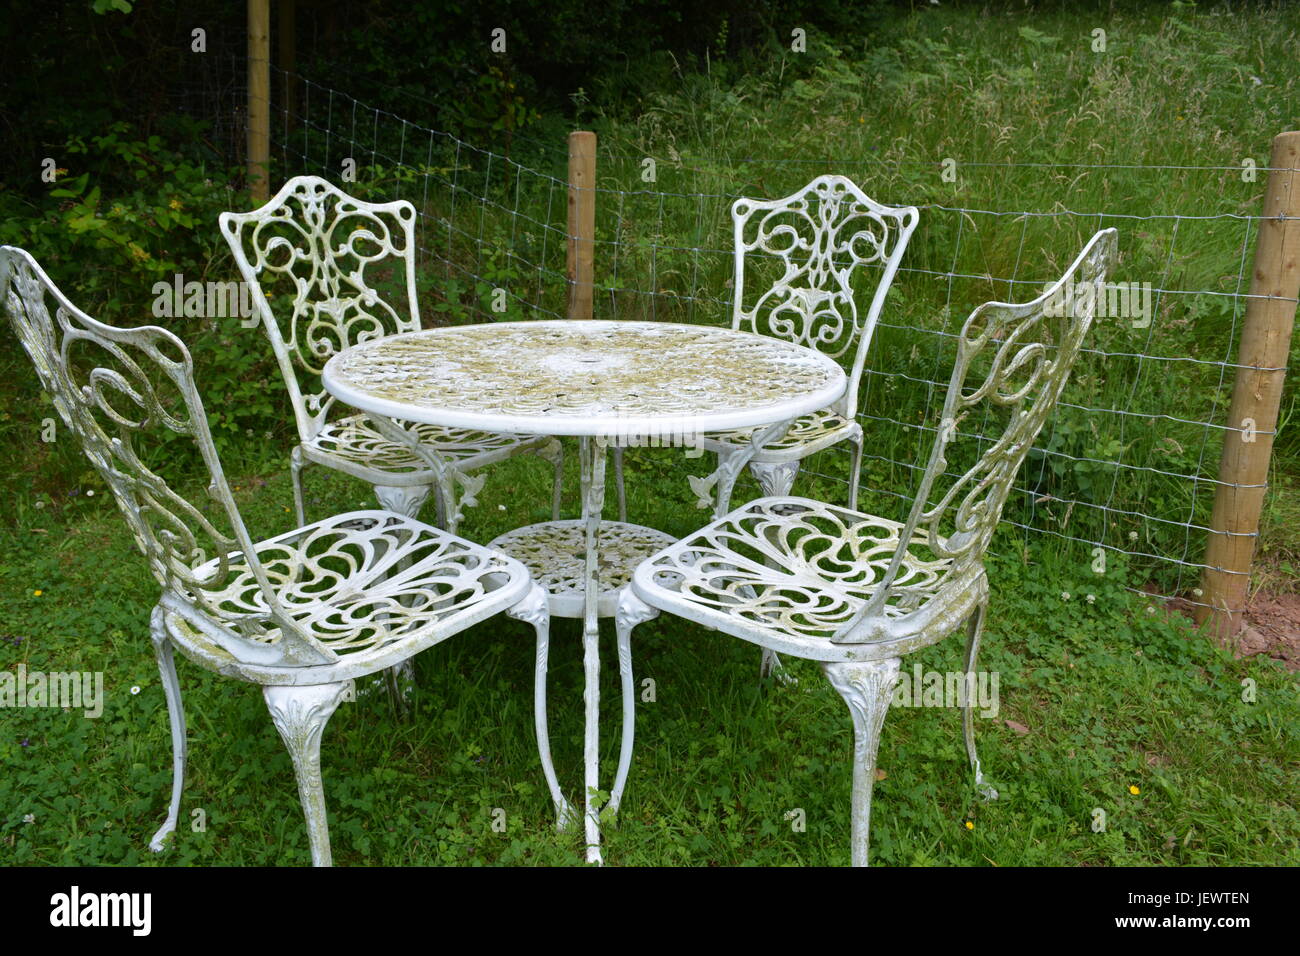 Weathered Ornate Scrolled Aluminium White Painted Round Garden Table And Chair Set On Lawn With Wire Mesh Boundary Fence Meadow Grass In Background Stock Photo Alamy